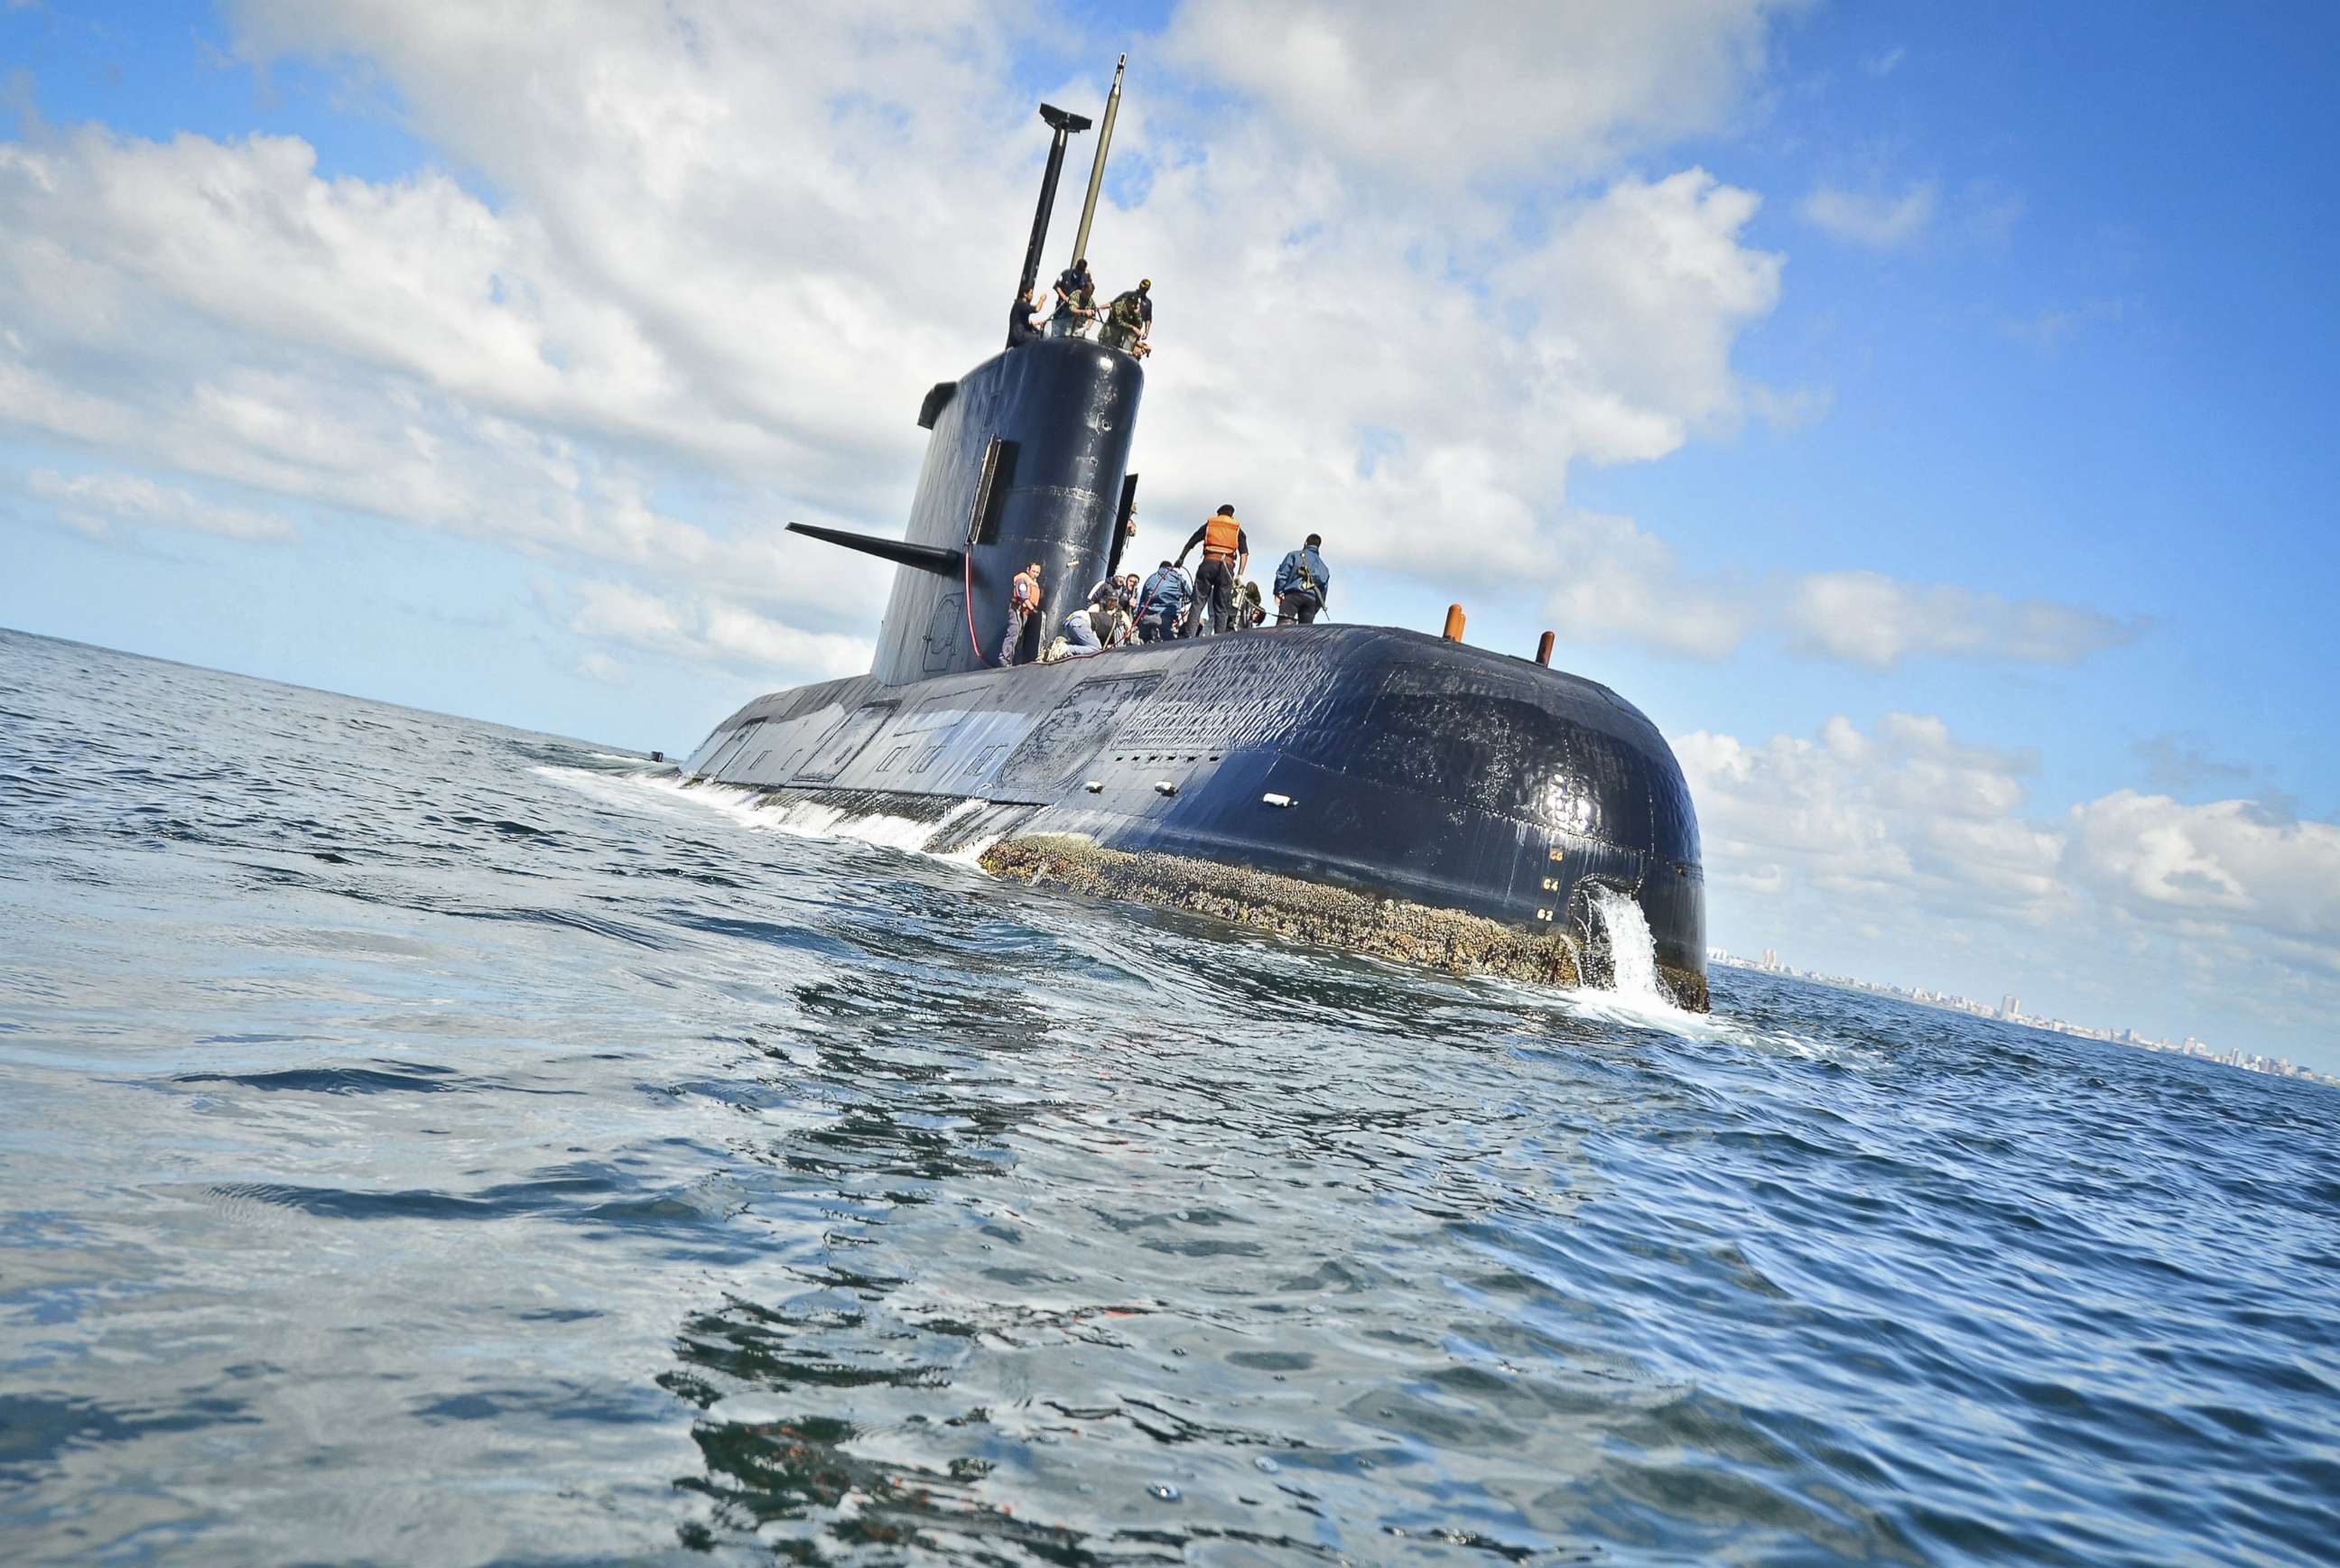 PHOTO: PHOTO: This undated handout photo made available by the Argentine Navy on Nov. 17, 2017, shows the ARA San Juan submarine.